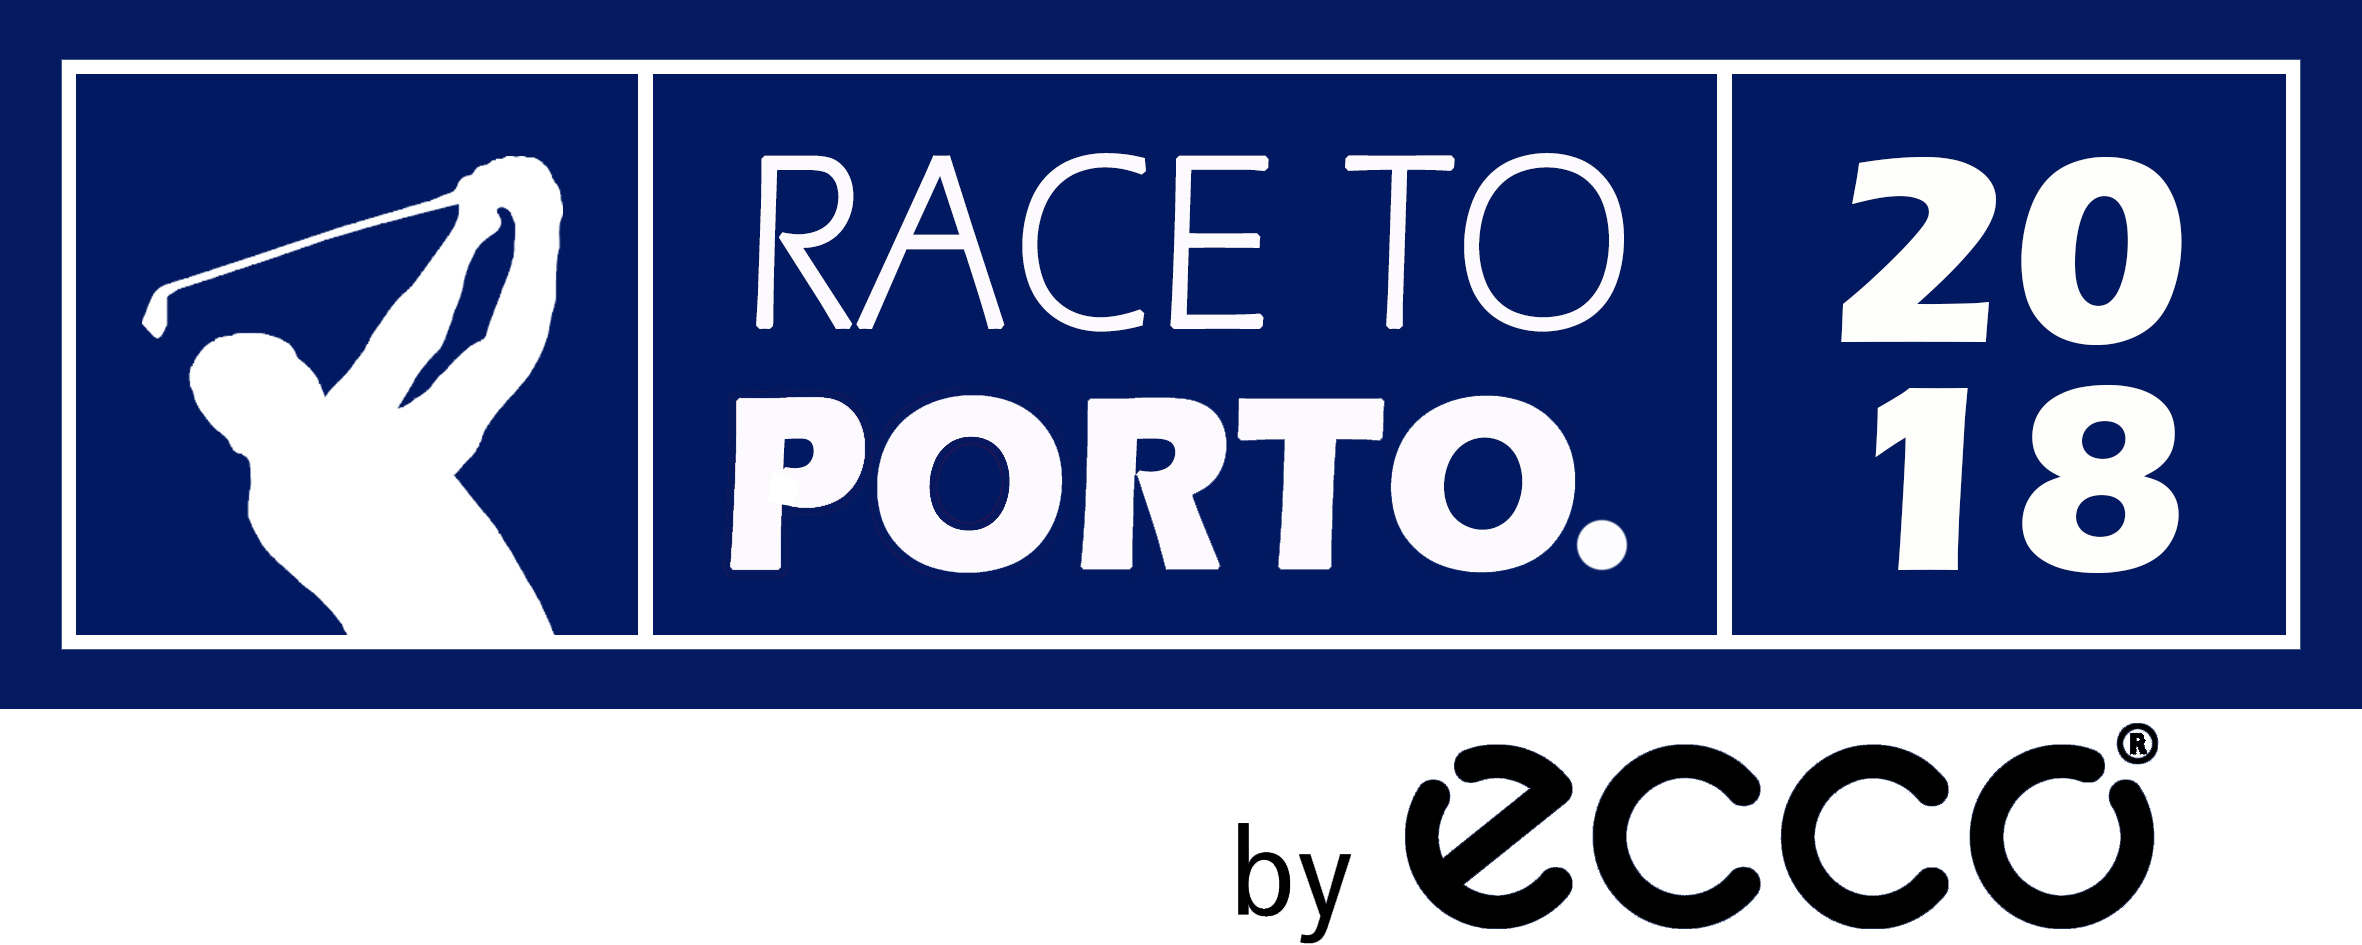 Champions Cup - Race to Porto 2018 - by ecco